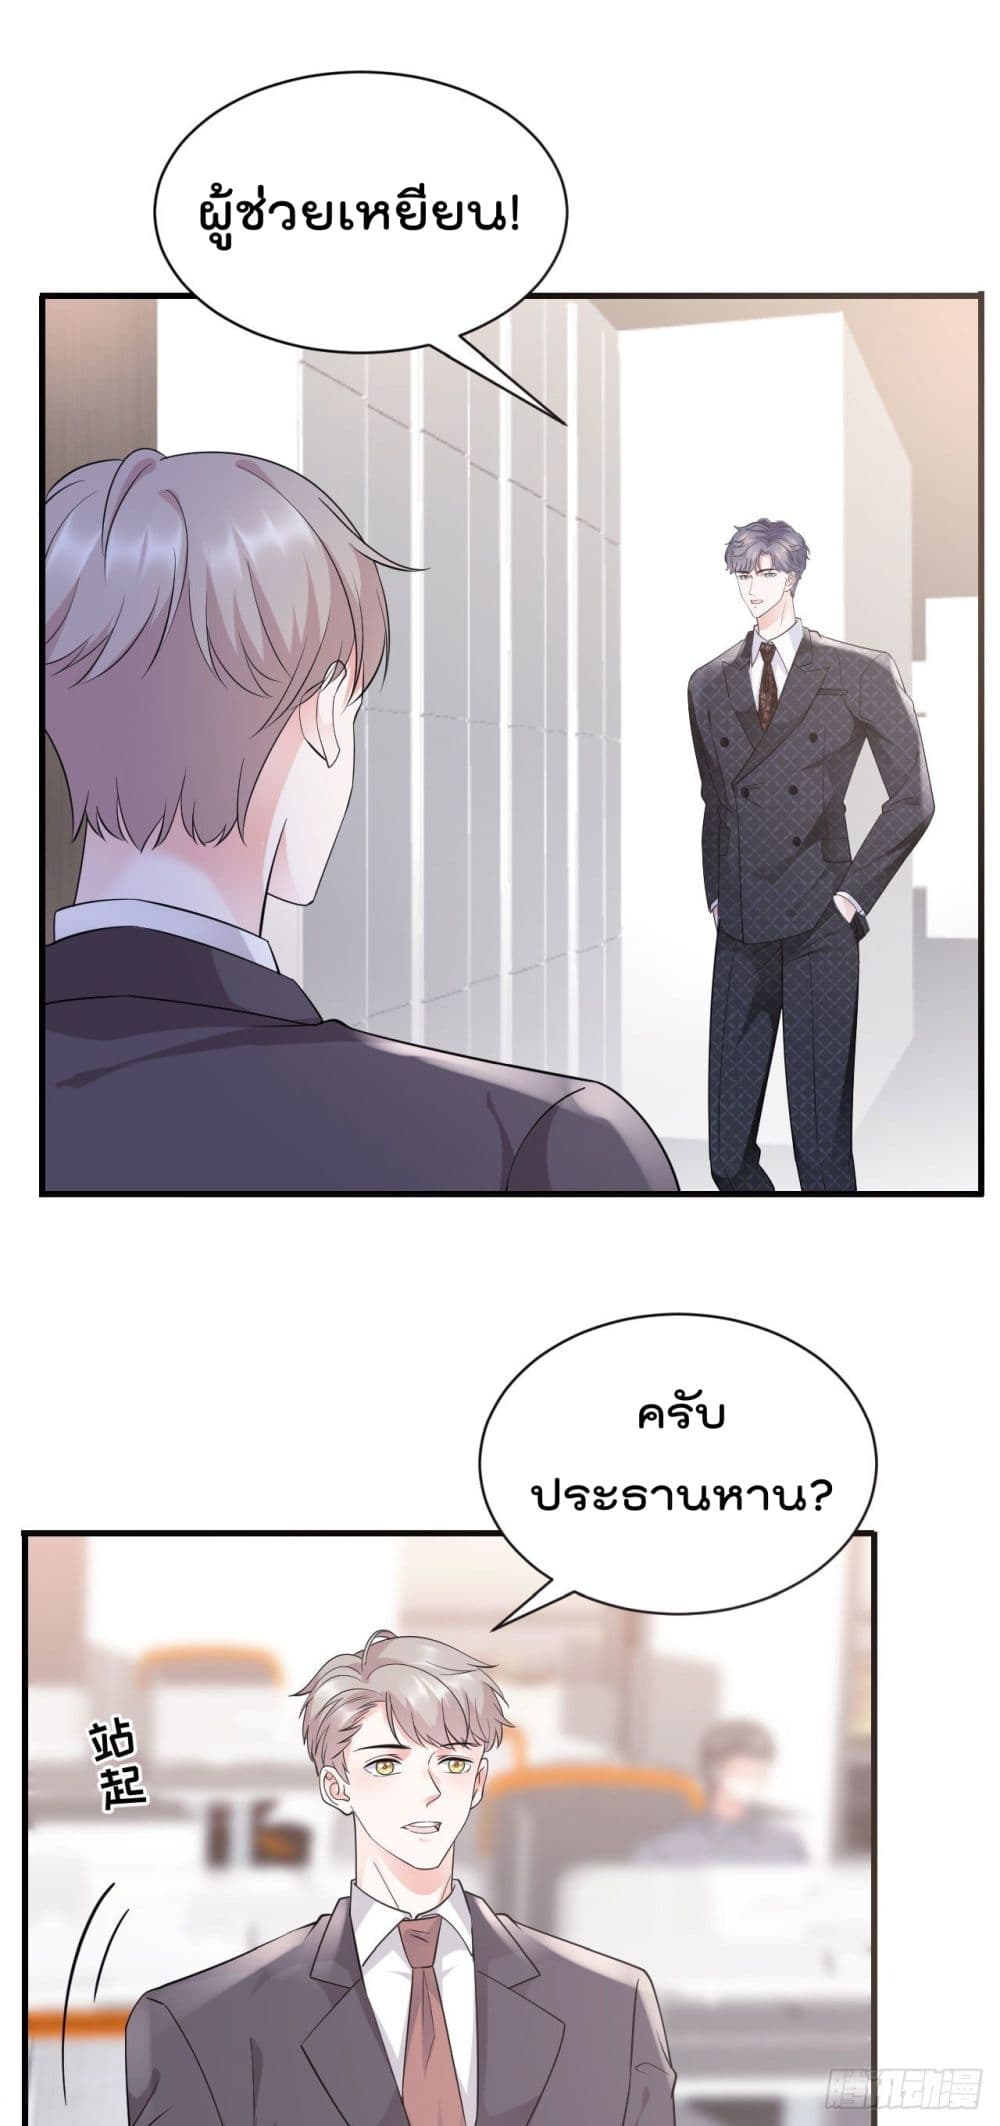 What Can the Eldest Lady Have คุณหนูใหญ่ ทำไมคุณร้ายอย่างนี้ 19-19